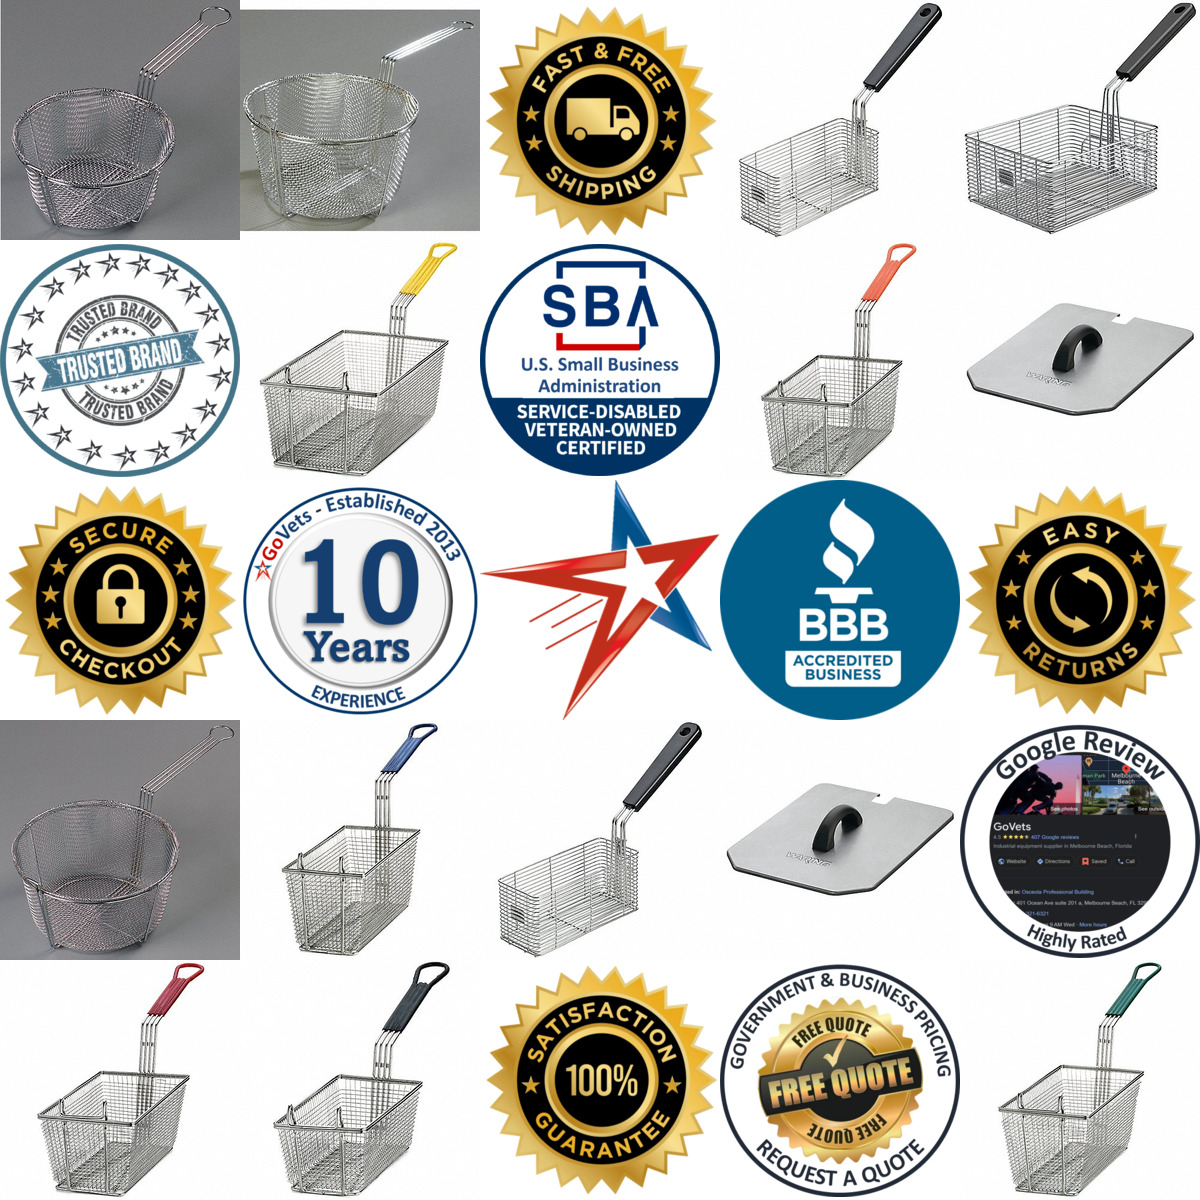 A selection of Fryer Baskets and Covers products on GoVets